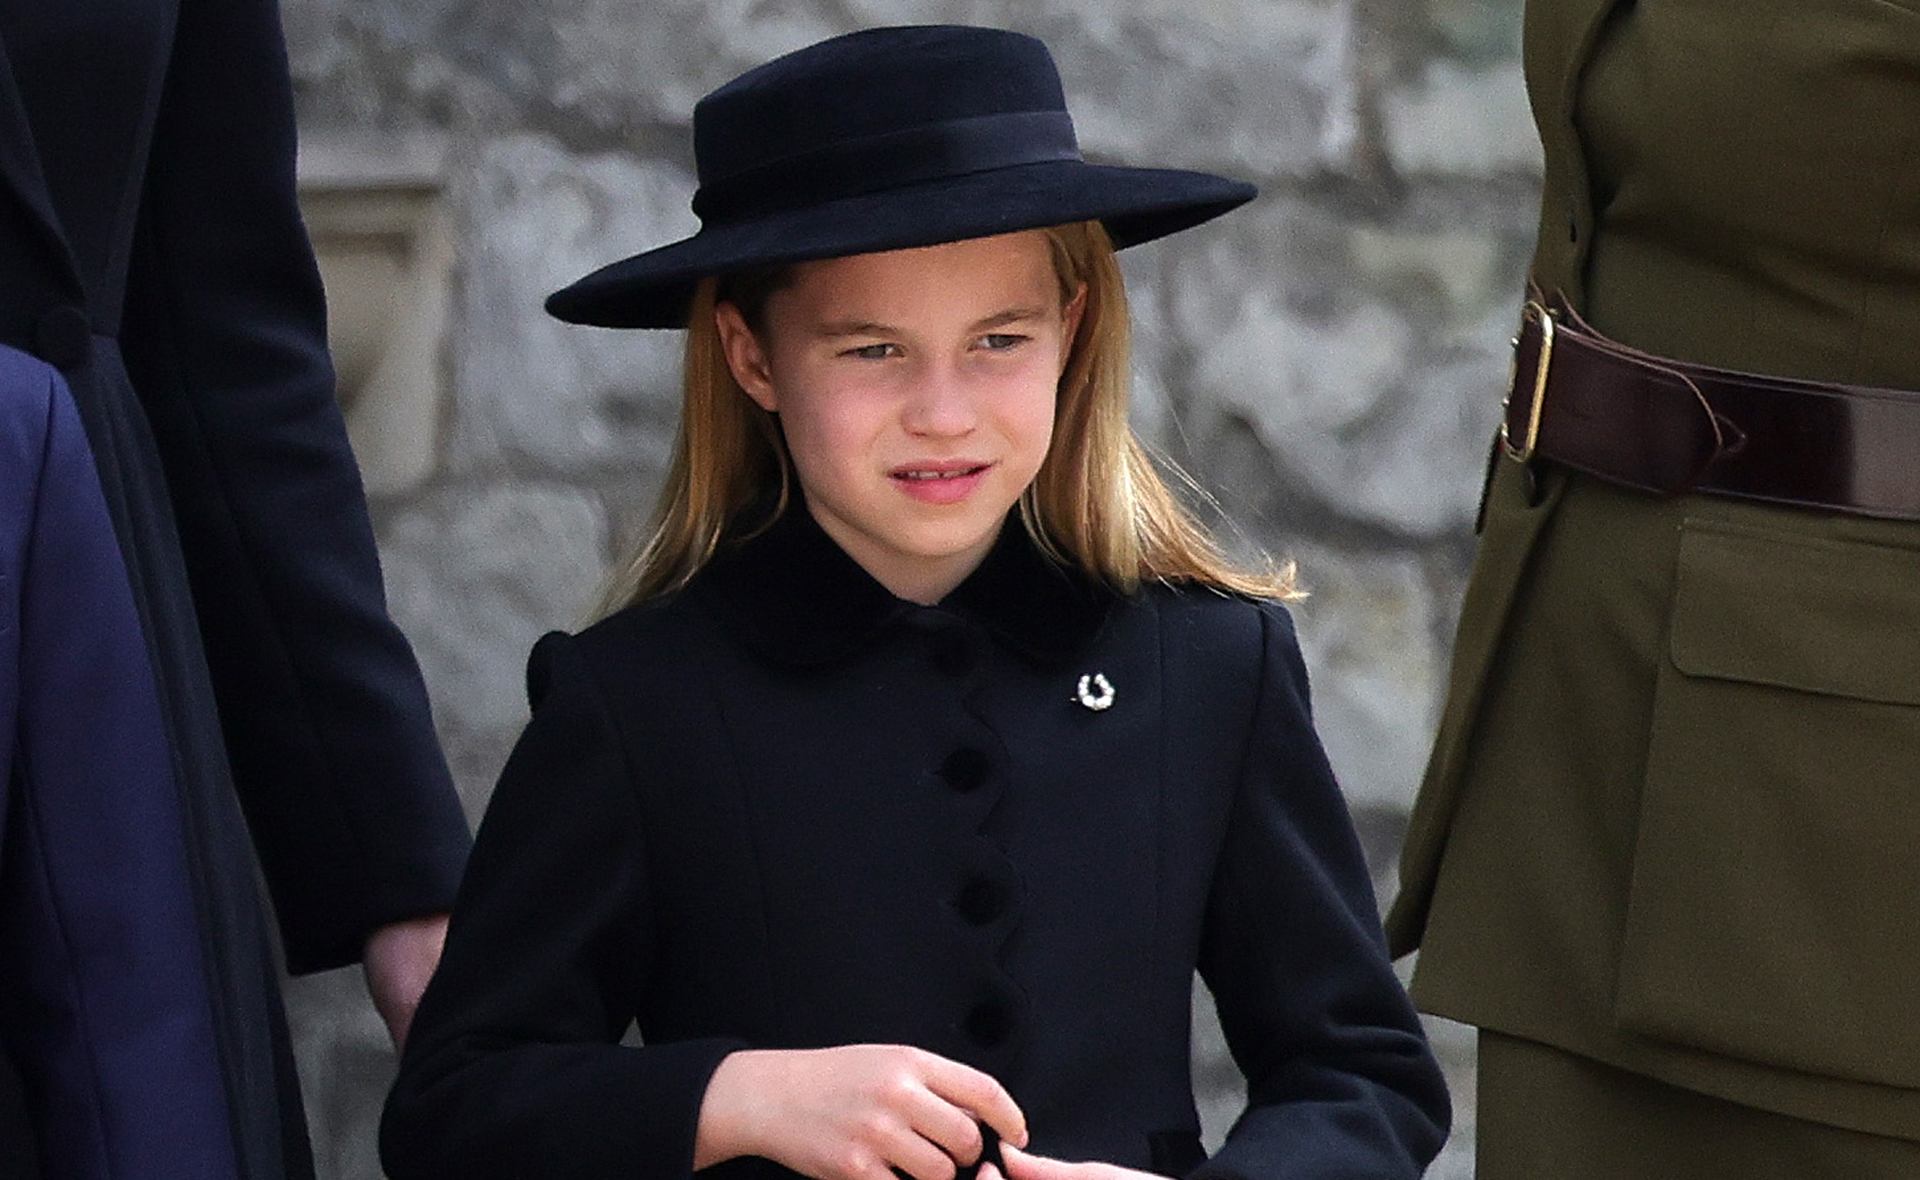 Princess Charlotte’s subtle yet sweet tribute to the Queen at her Majesty’s funeral